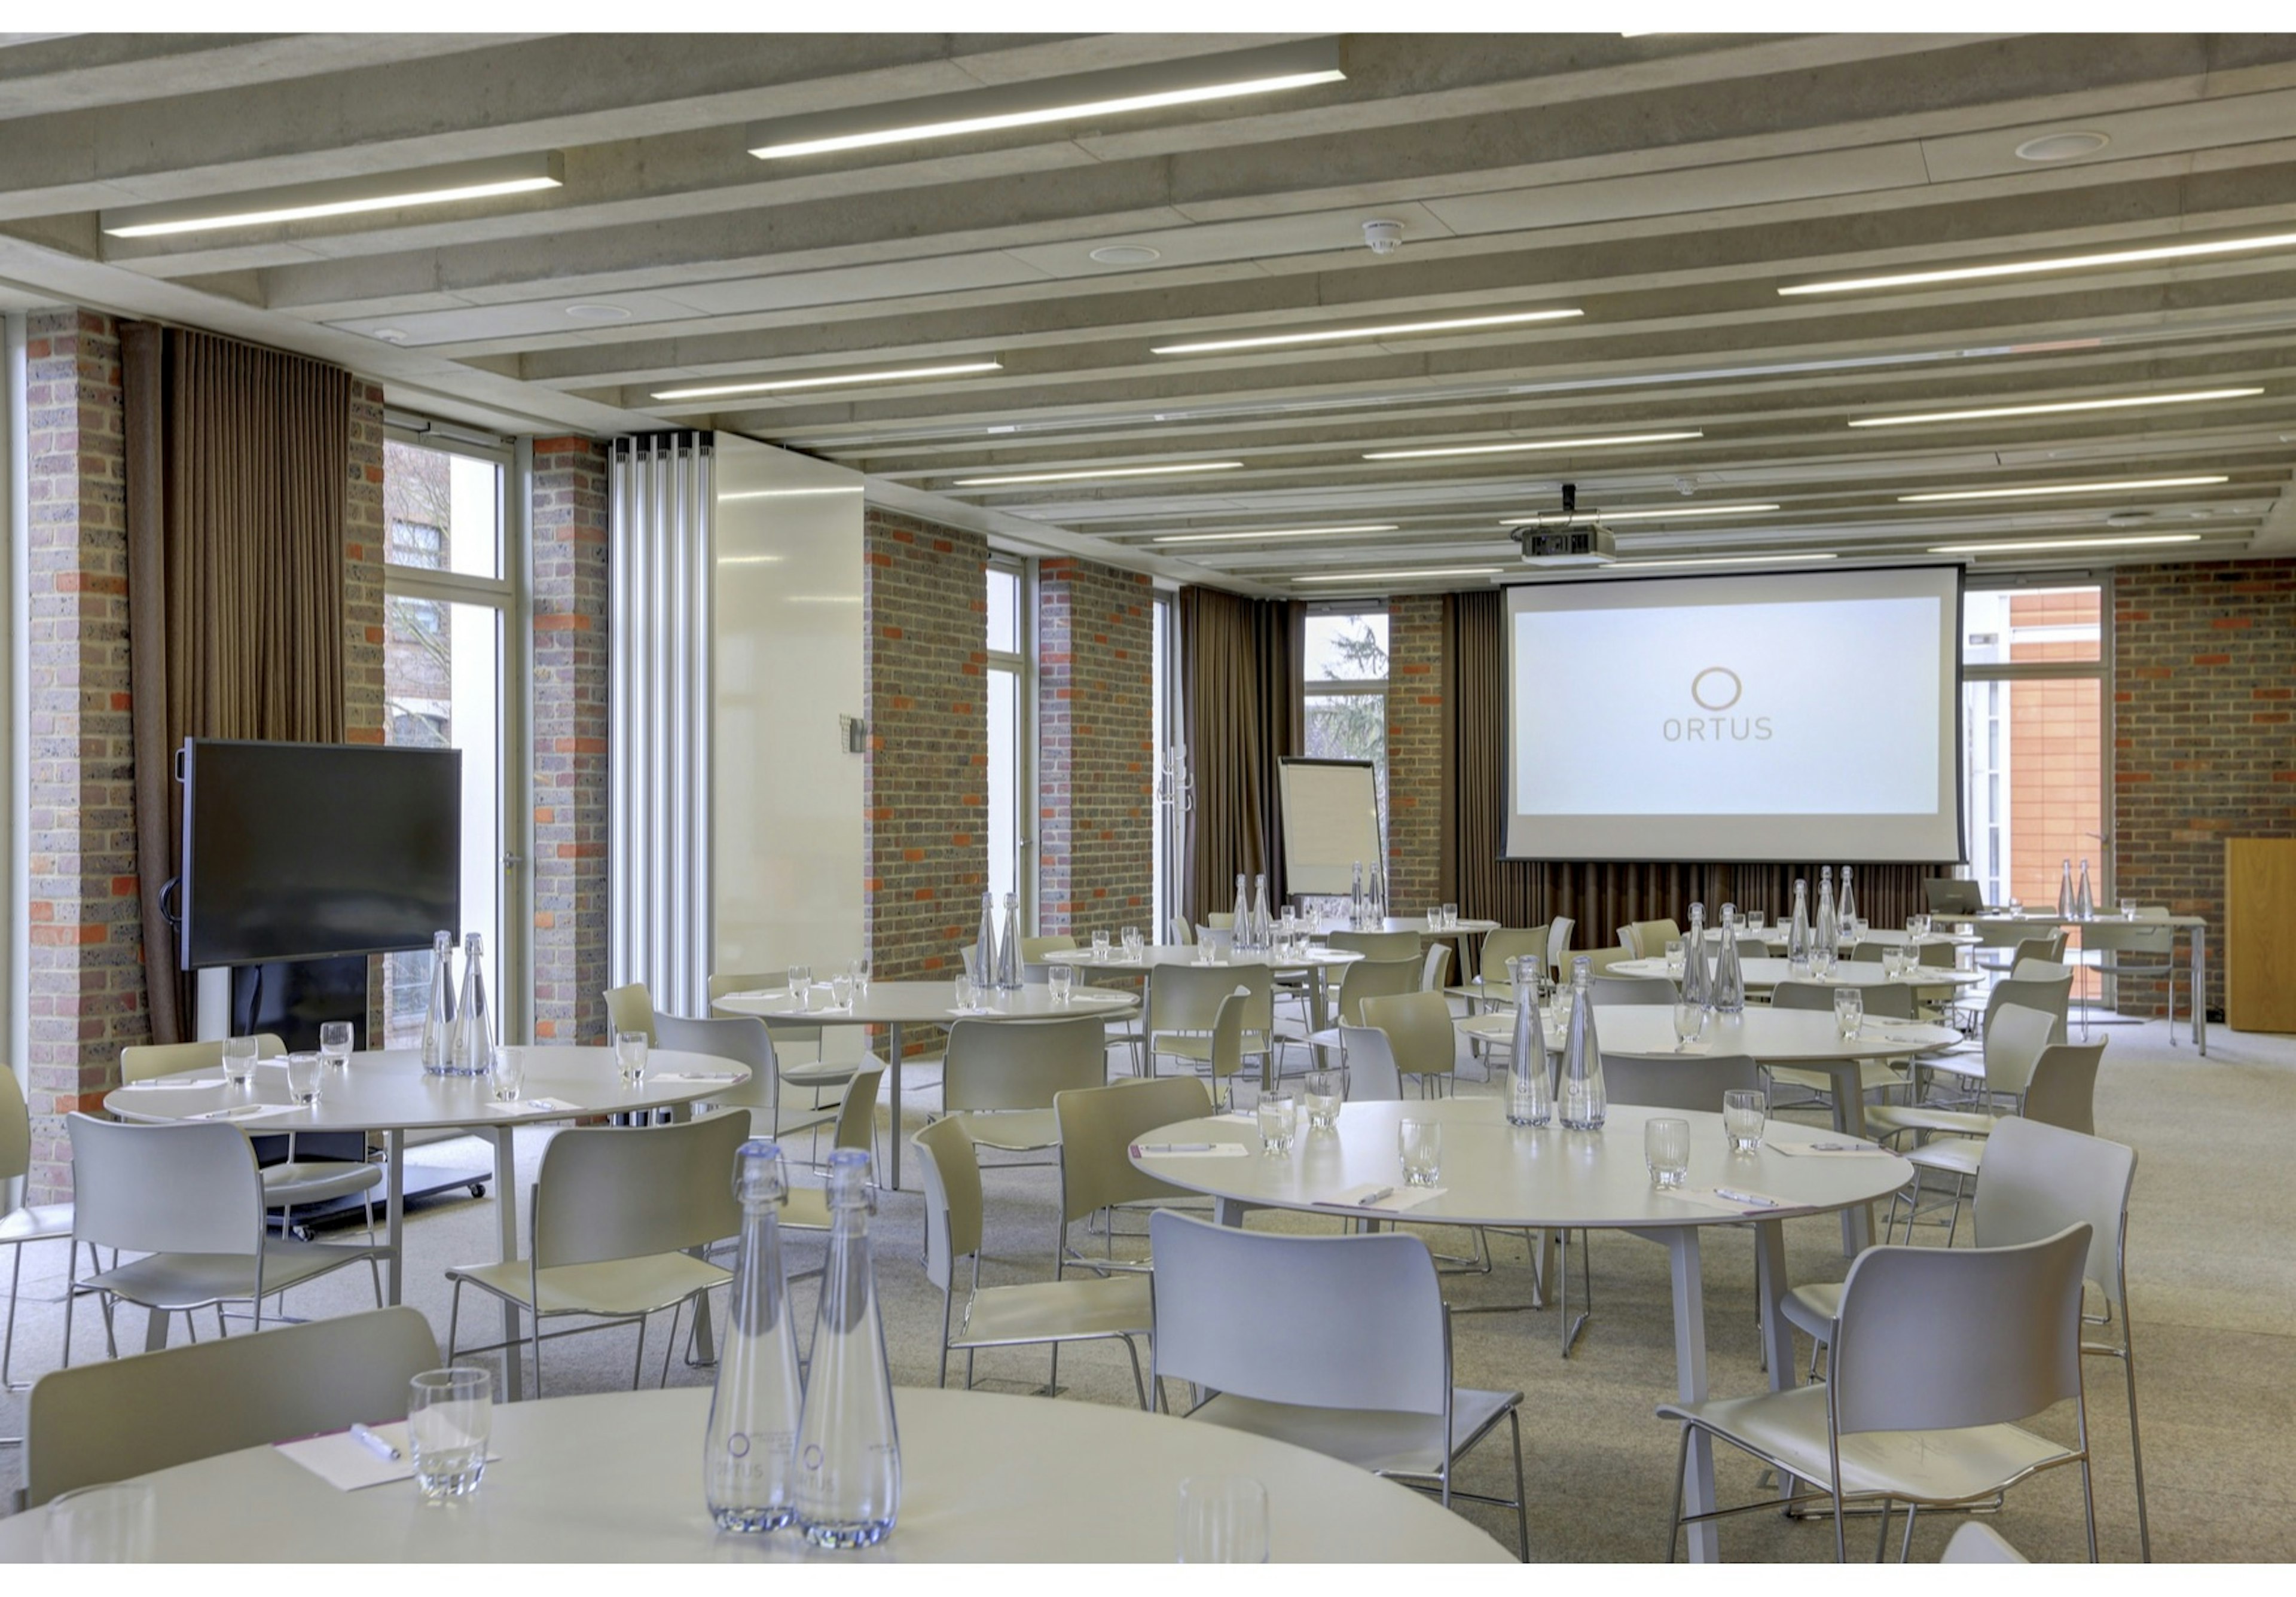 Business - ORTUS Conference and Events Venue